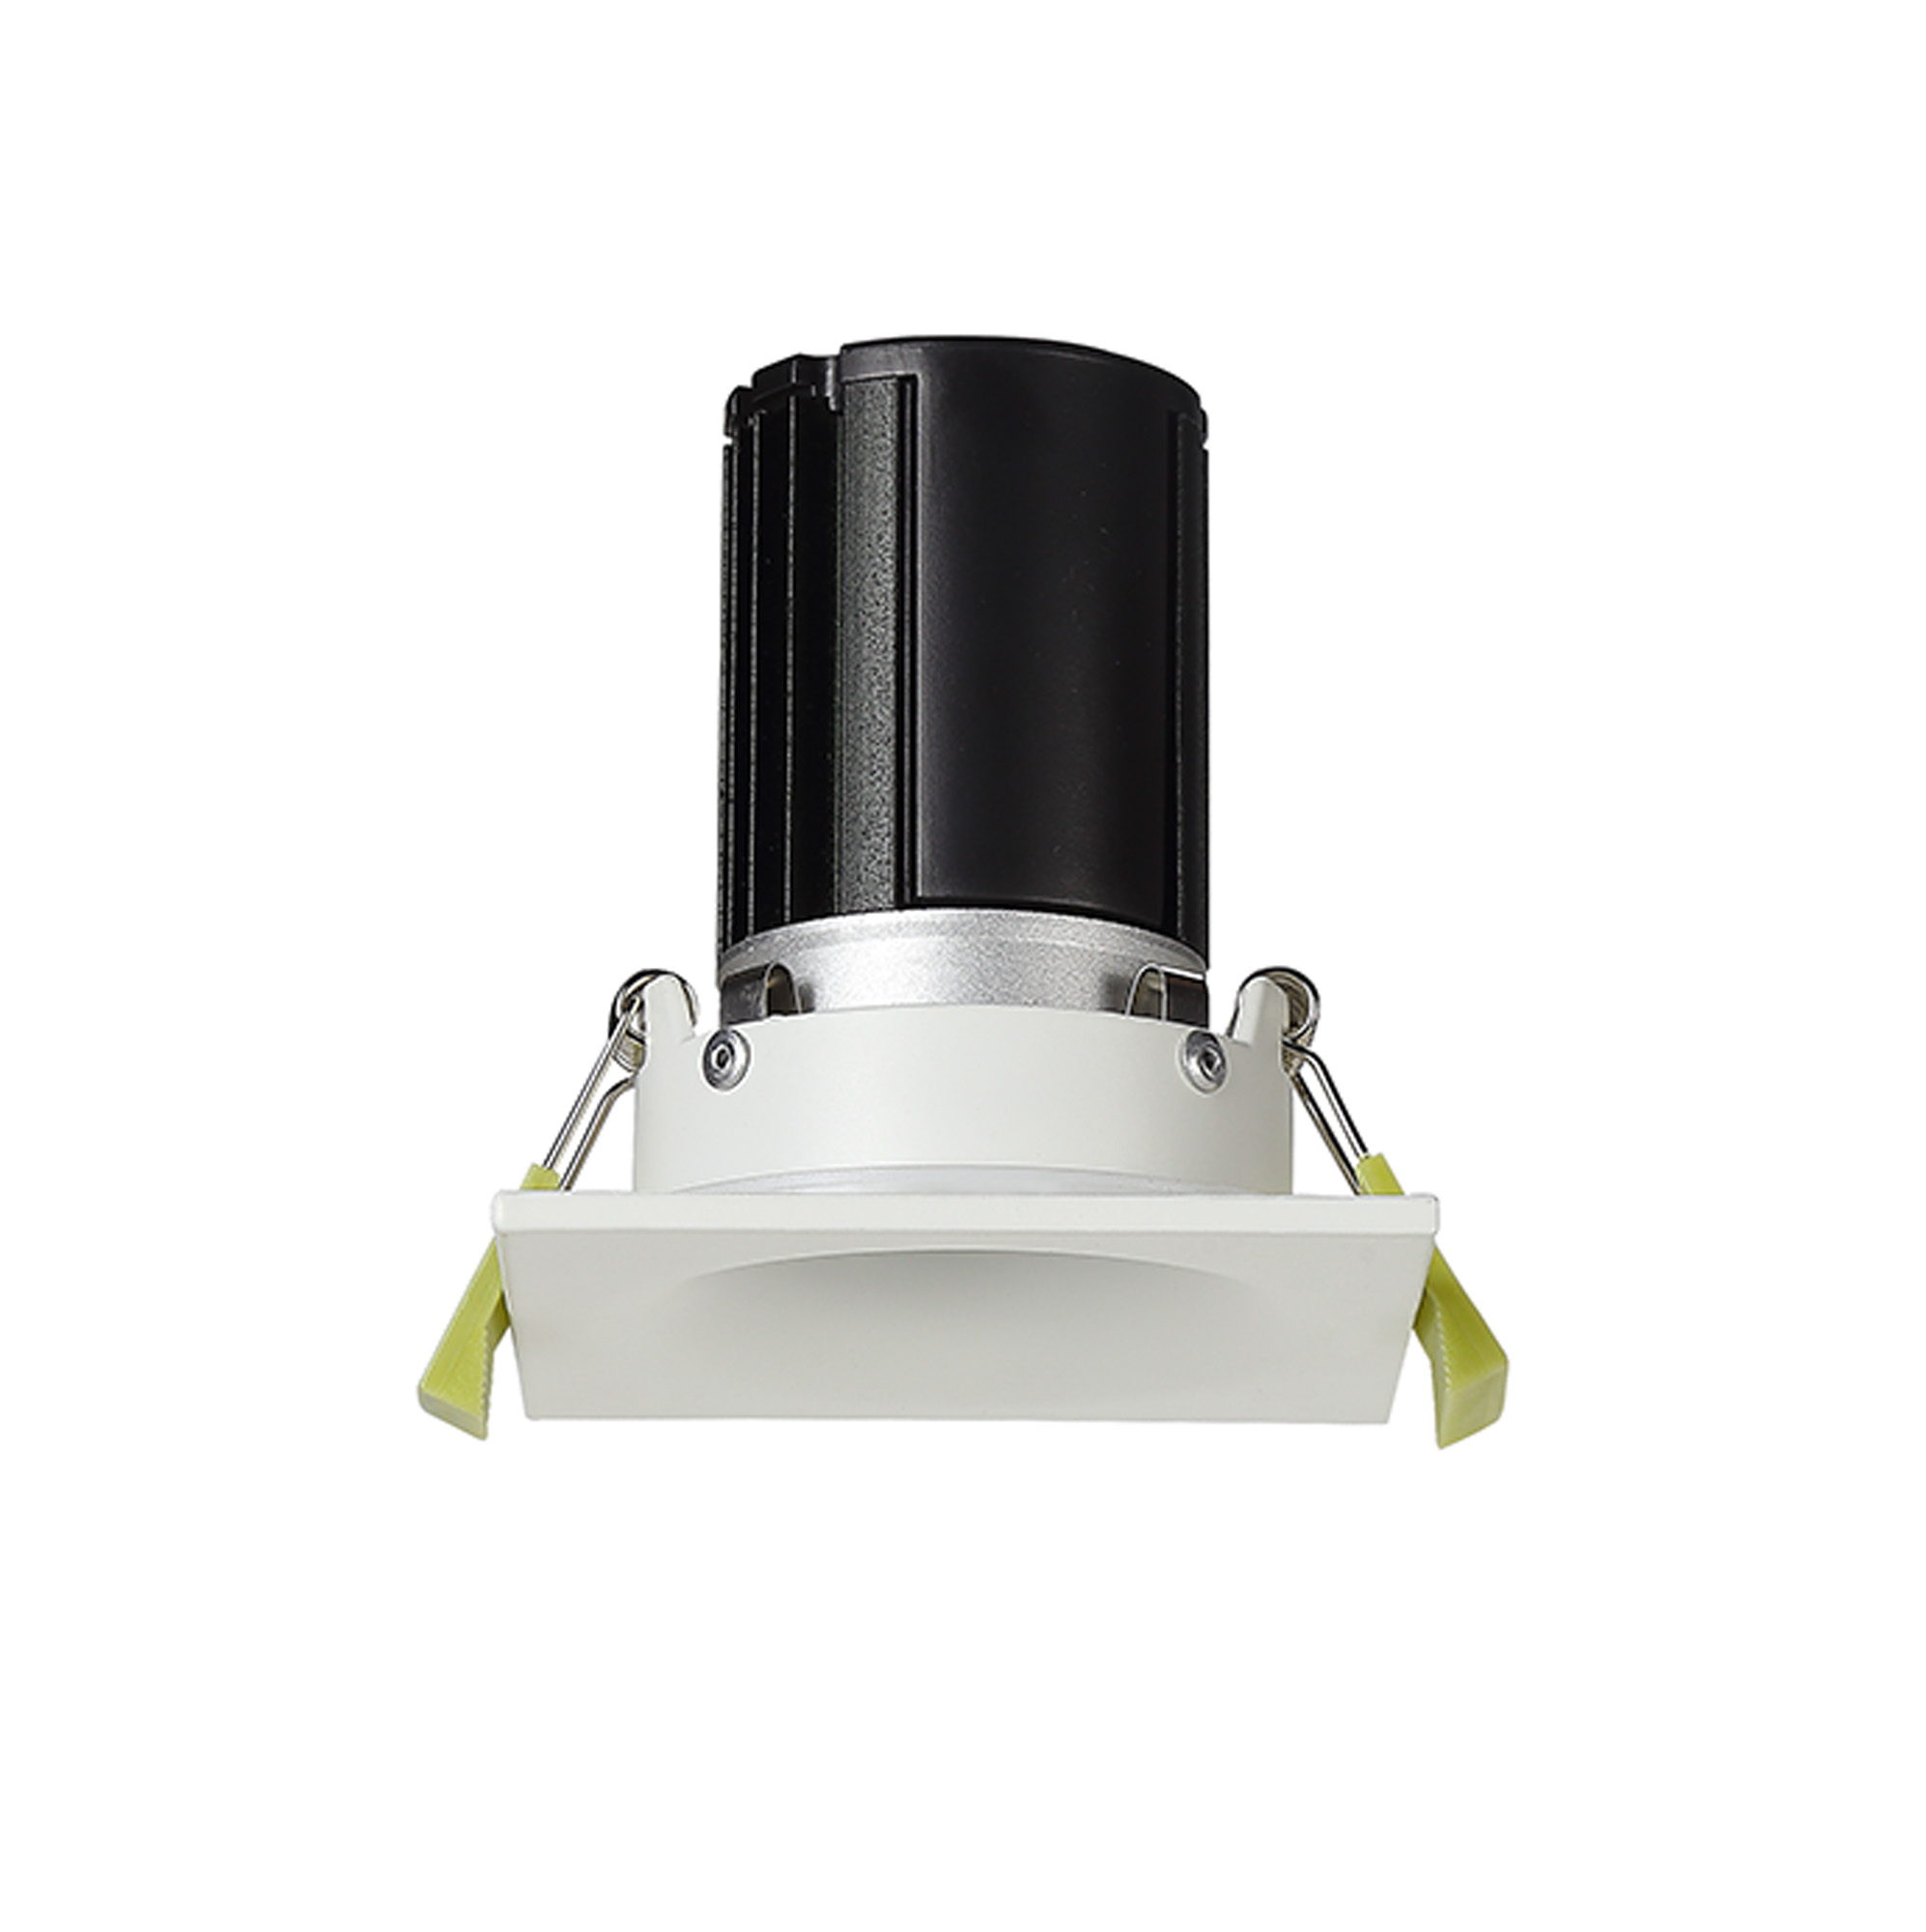 DM201498  Bruve 9 Tridonic powered 9W 2700K 700lm 24° LED Engine,250mA , CRI>90 LED Engine Matt White Fixed Square Recessed Downlight, Inner Glass cover, IP65